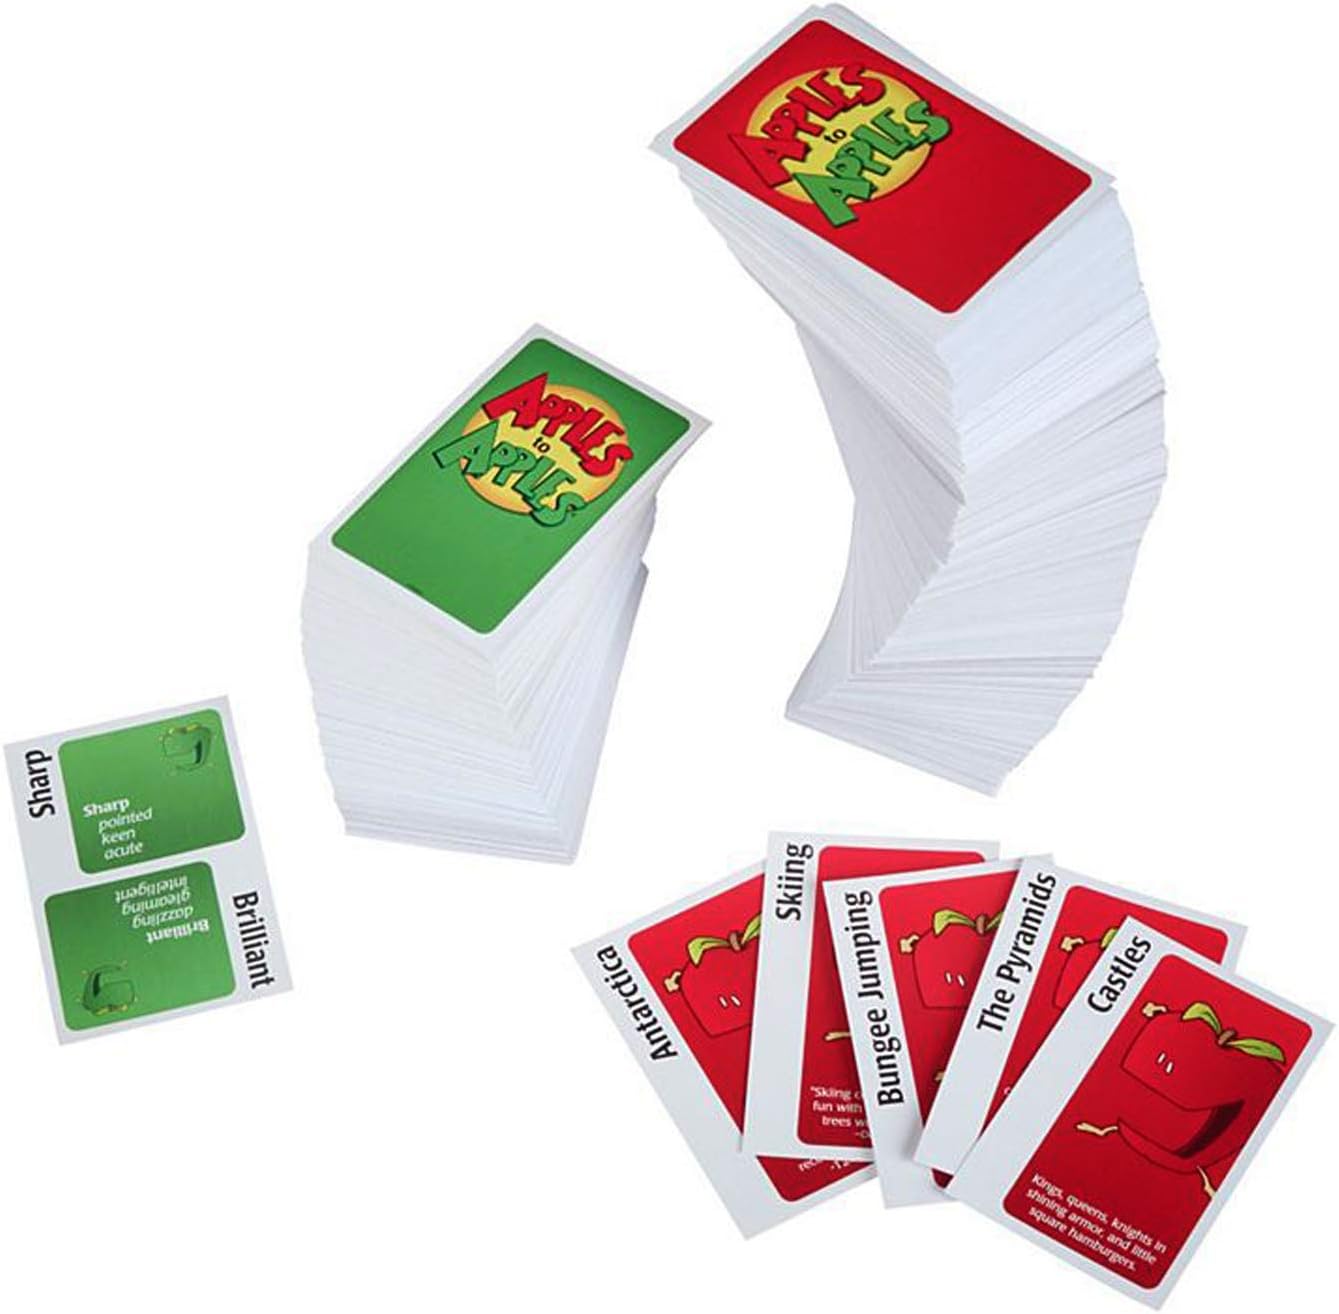 APPLES TO APPLES® Party Box